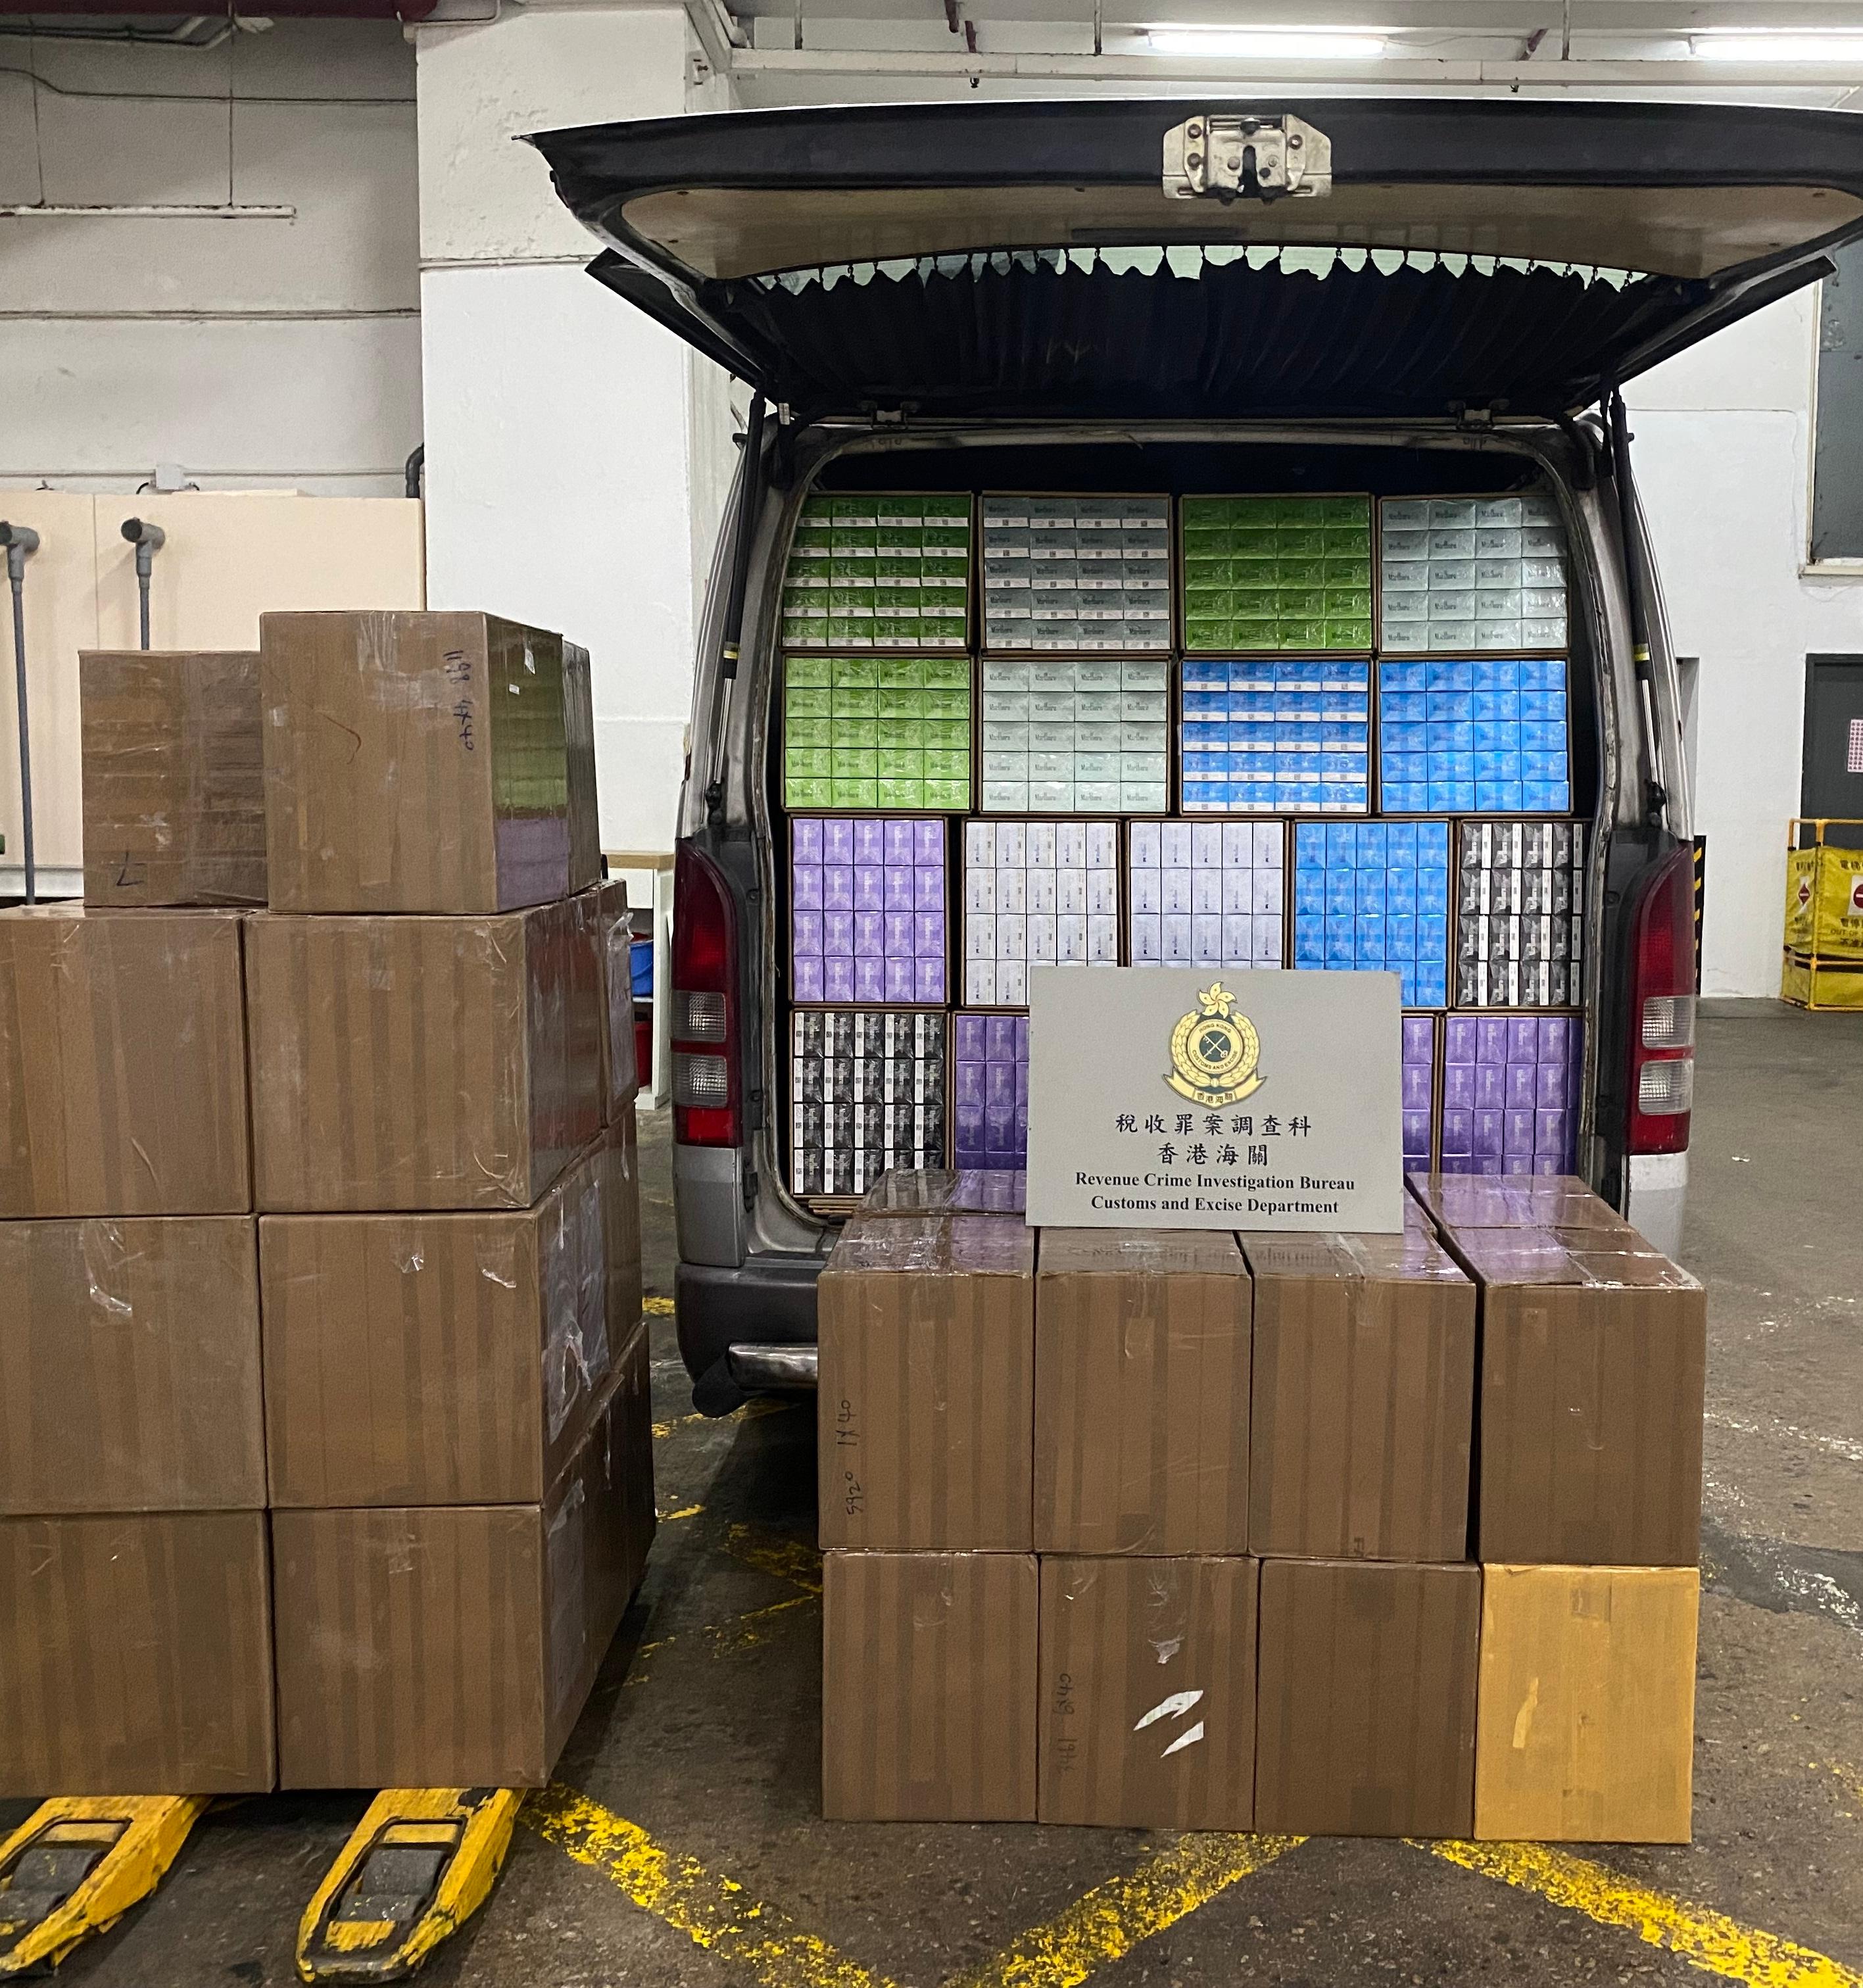 Hong Kong Customs has mounted a special operation in the past month to combat illicit heat-not-burn (HNB) products as well as nicotine-containing electronic cigarettes and electronic cigarette oil. A total of 51 cases were detected across the territory and about 2.63 million suspected illicit HNB products, about 190 000 suspected nicotine-containing electronic cigarettes and about 5 000 millilitres of suspected nicotine-containing electronic cigarette oil were seized with an estimated market value of about $15 million and a duty potential of about $5 million. Photo shows the suspected illicit HNB products seized by Customs officers at an industrial building in Cheung Sha Wan and a vehicle suspected to be used for illicit HNB product distribution.